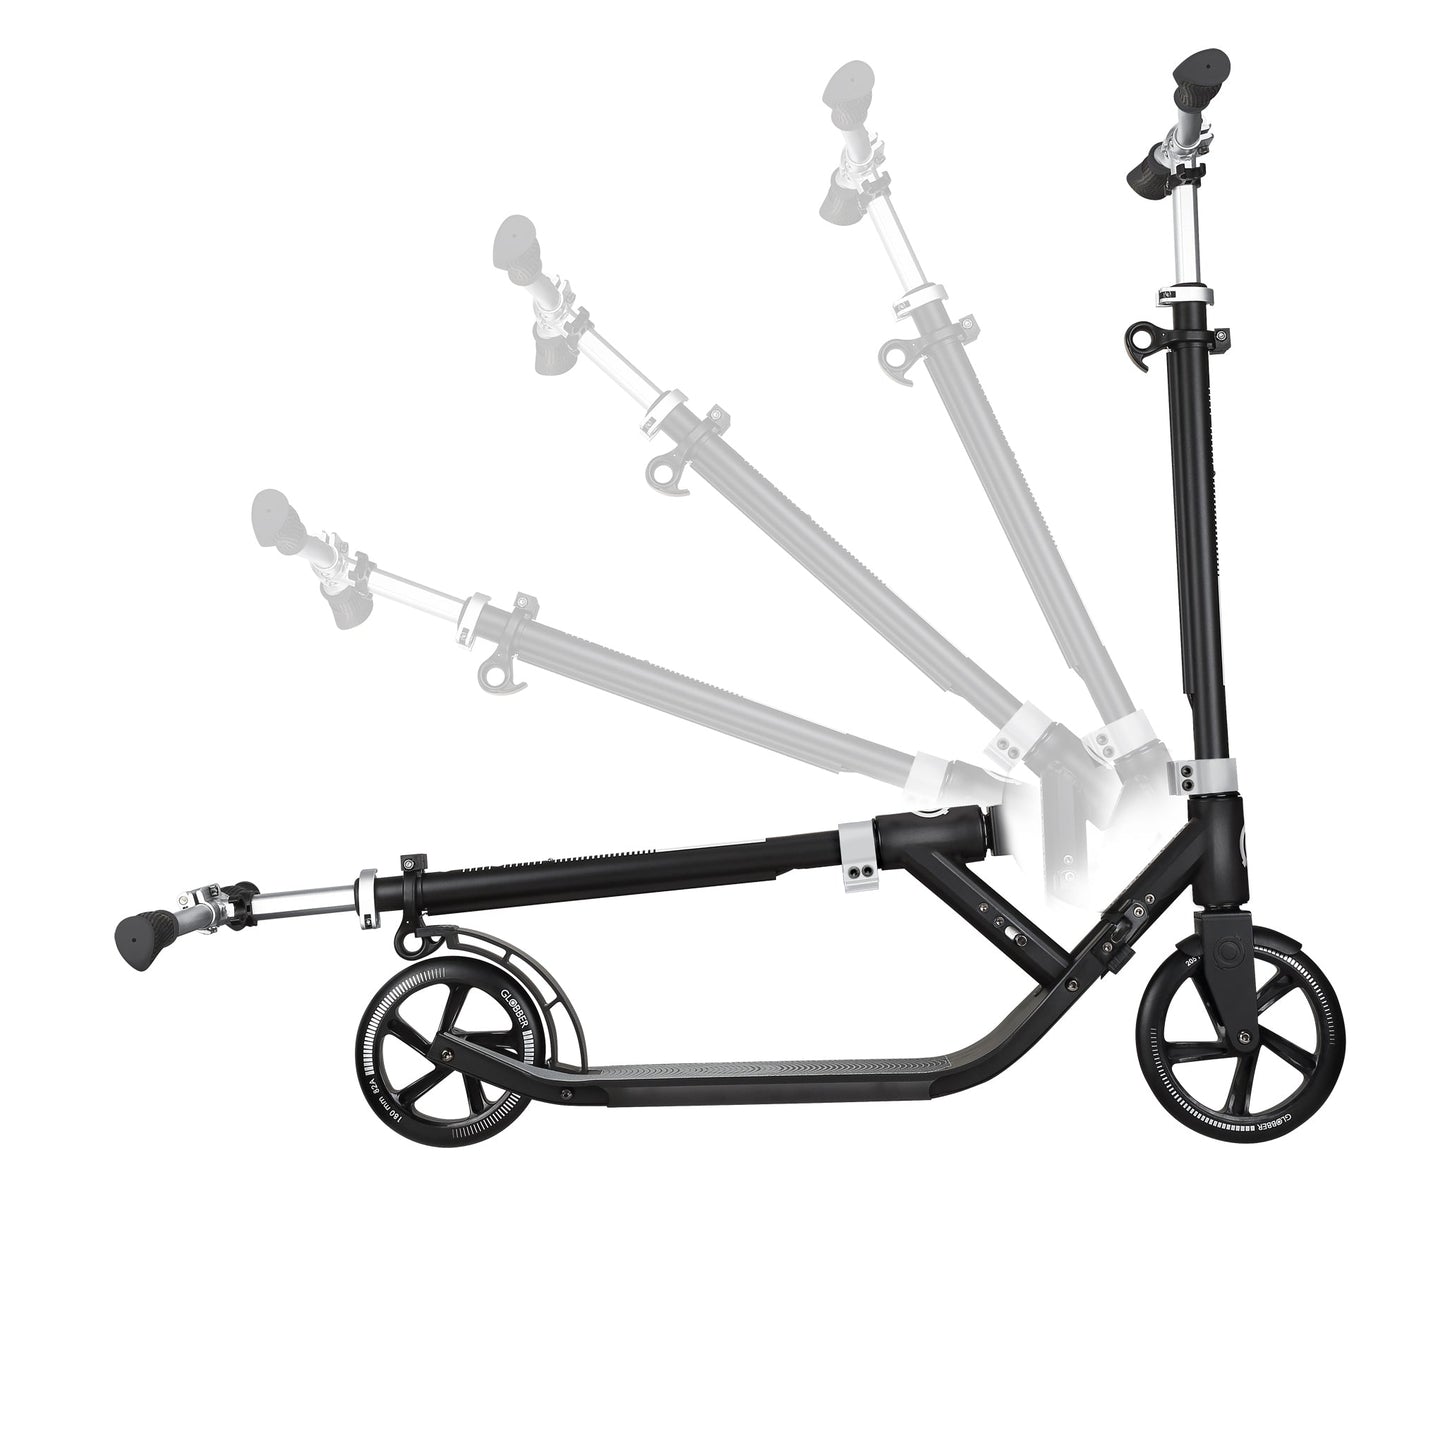 One NL 205-180 Duo: Adjustable 1-Second Folding Scooter for Adults - Lead Grey